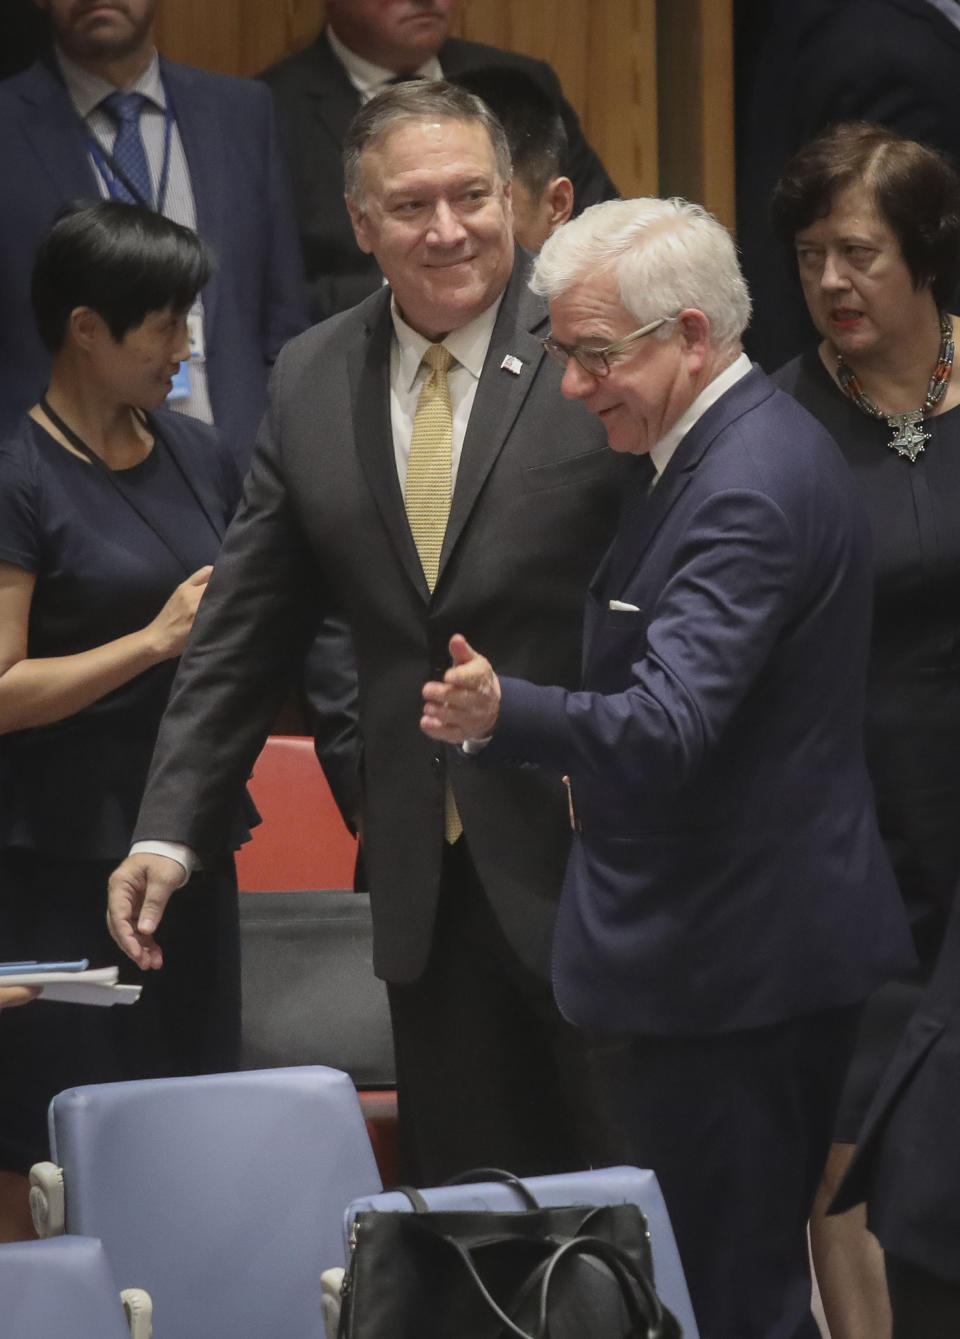 United States Secretary of State Michael Pompeo, center, and Foreign Minister of Poland Jacek Czaputowicz, second from right, arrive for a meeting of the United Nations Security Council on the Mideast, Tuesday Aug. 20, 2019 at U.N. headquarters. (AP Photo/Bebeto Matthews)